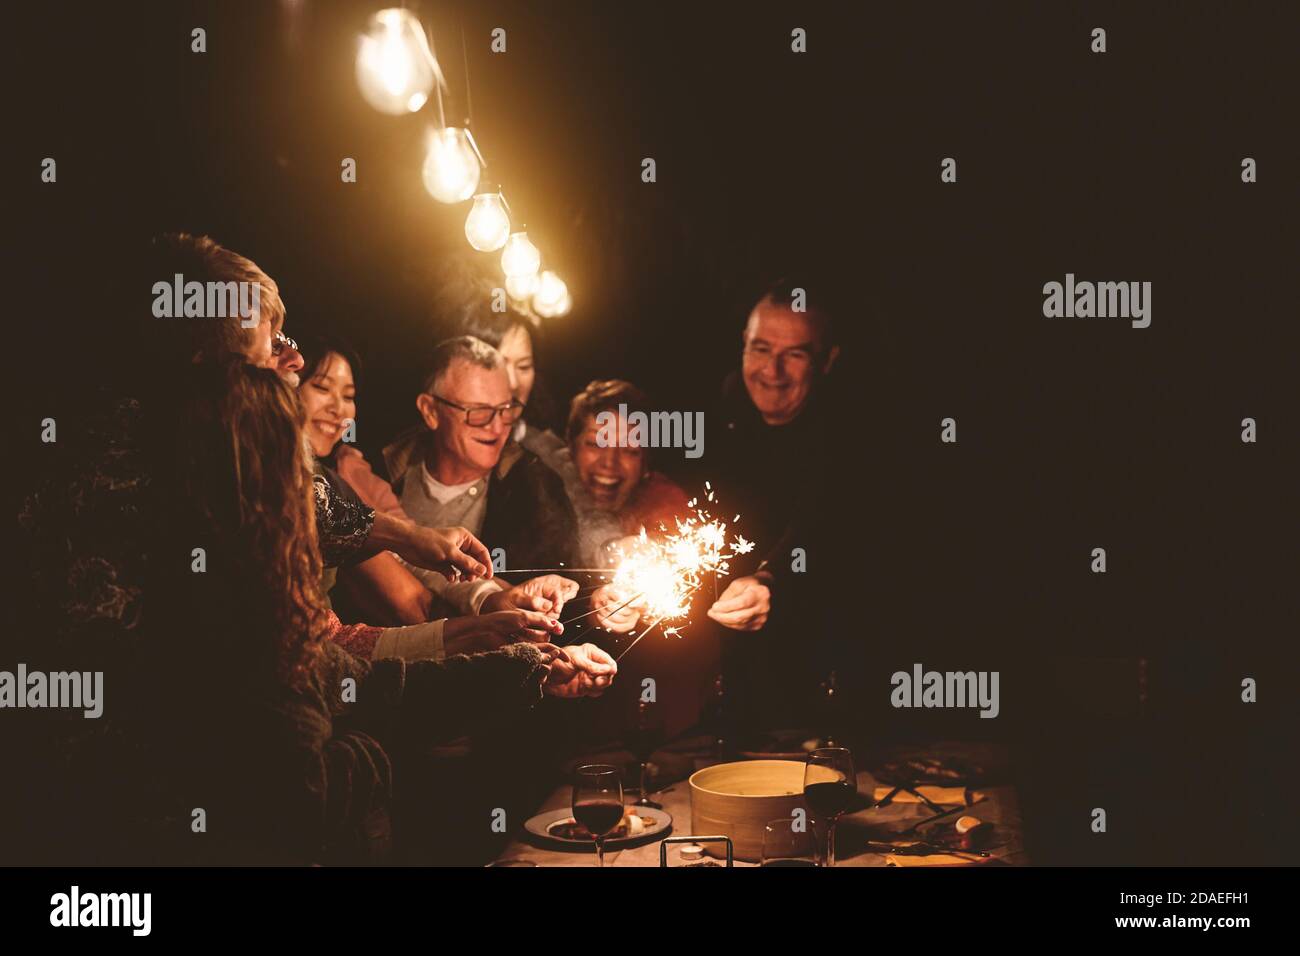 Happy family celebrating holidays with sparklers fireworks at night dinner party - Group of people with different ages and ethnicity having fun Stock Photo